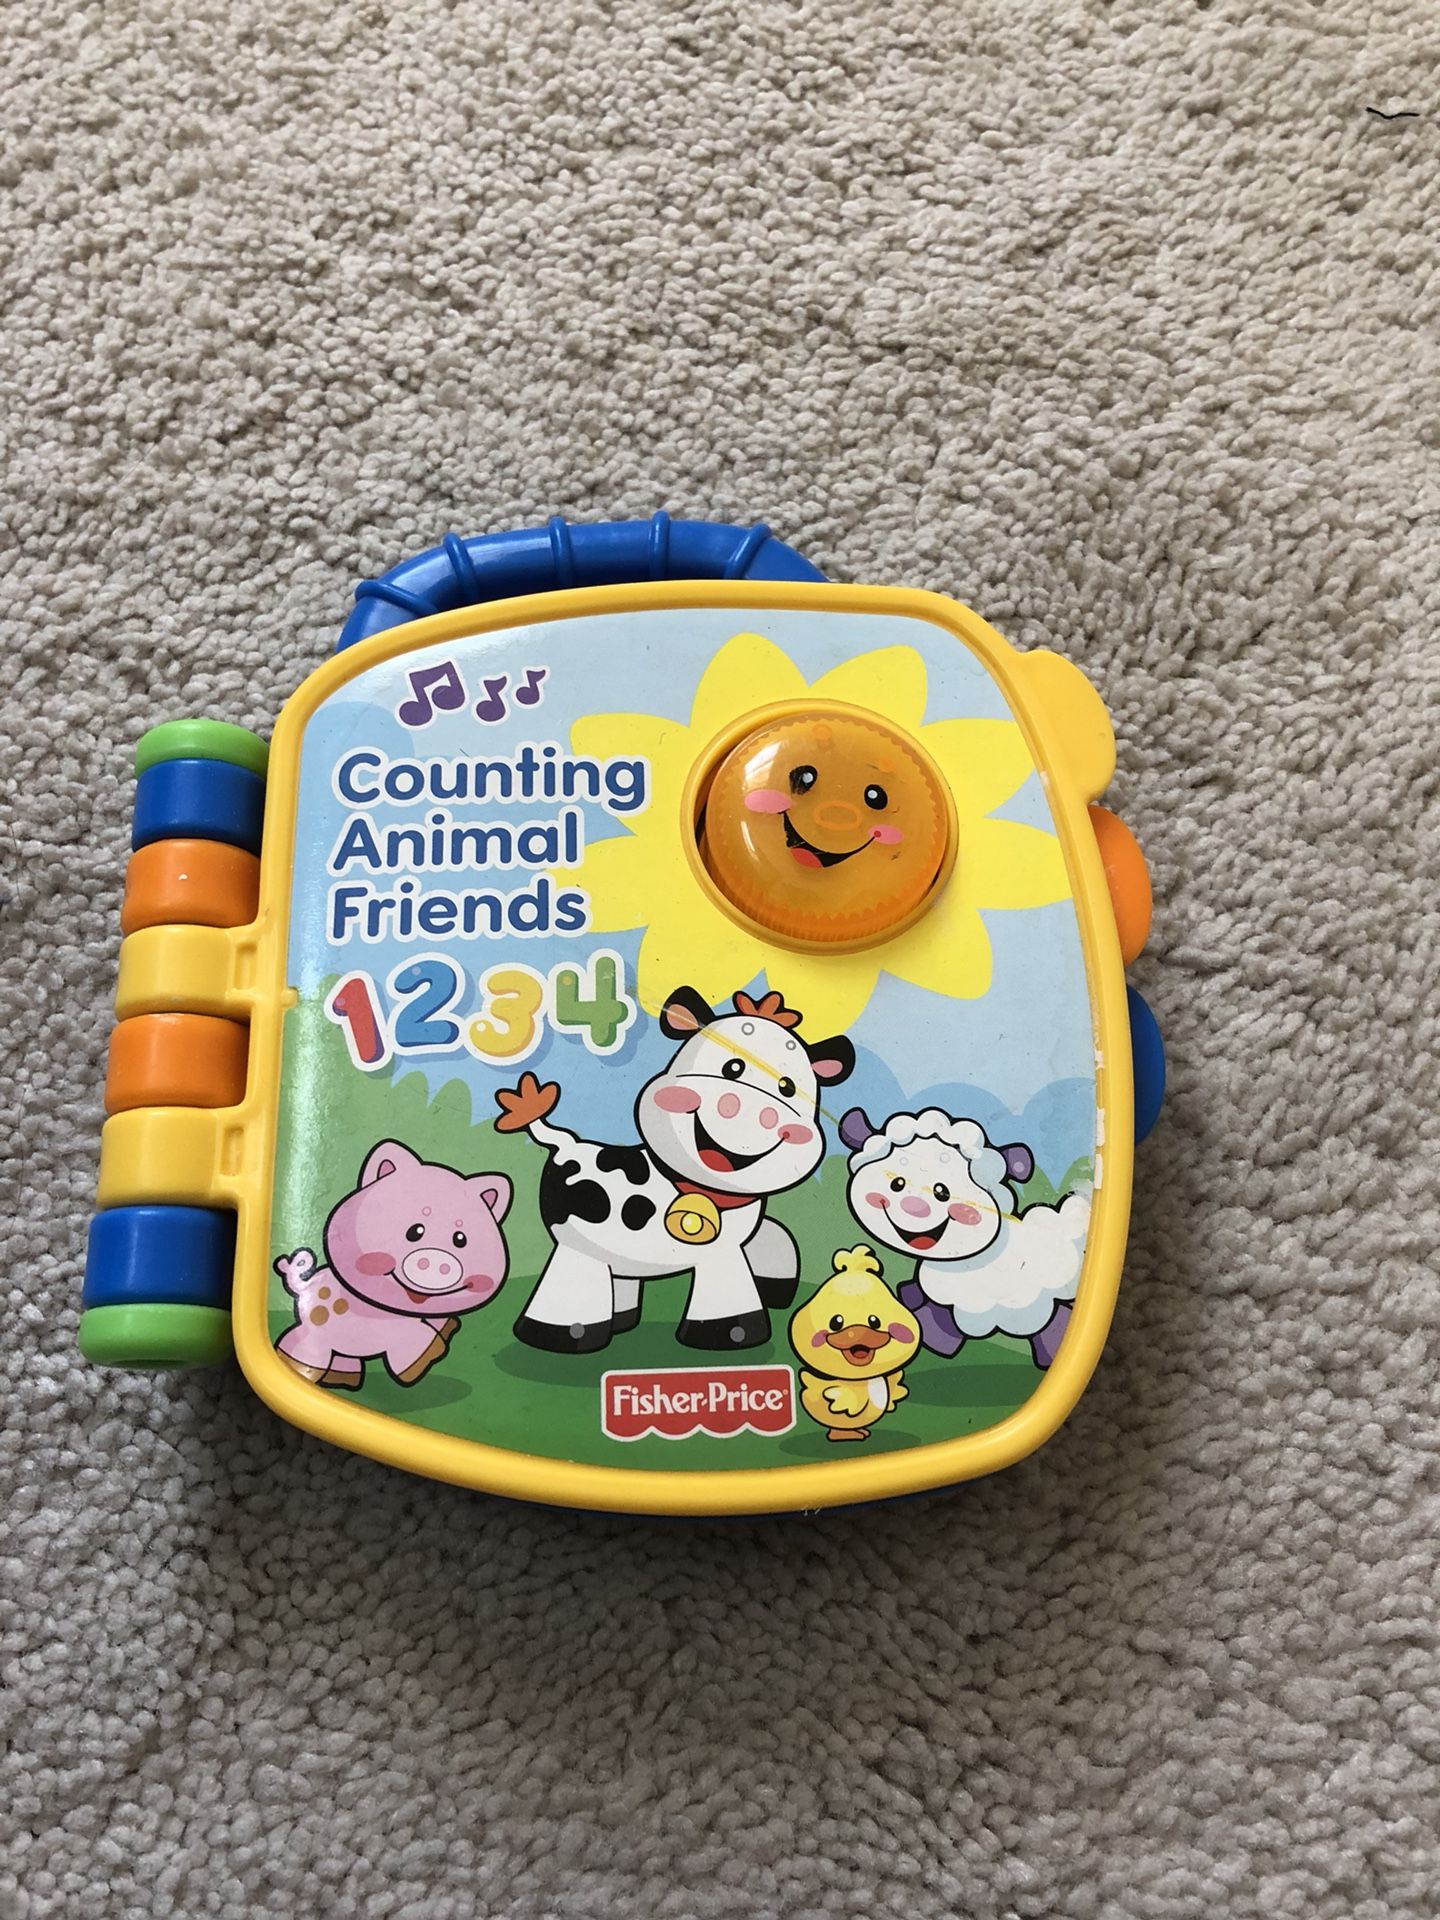 Counting animal friends book with music